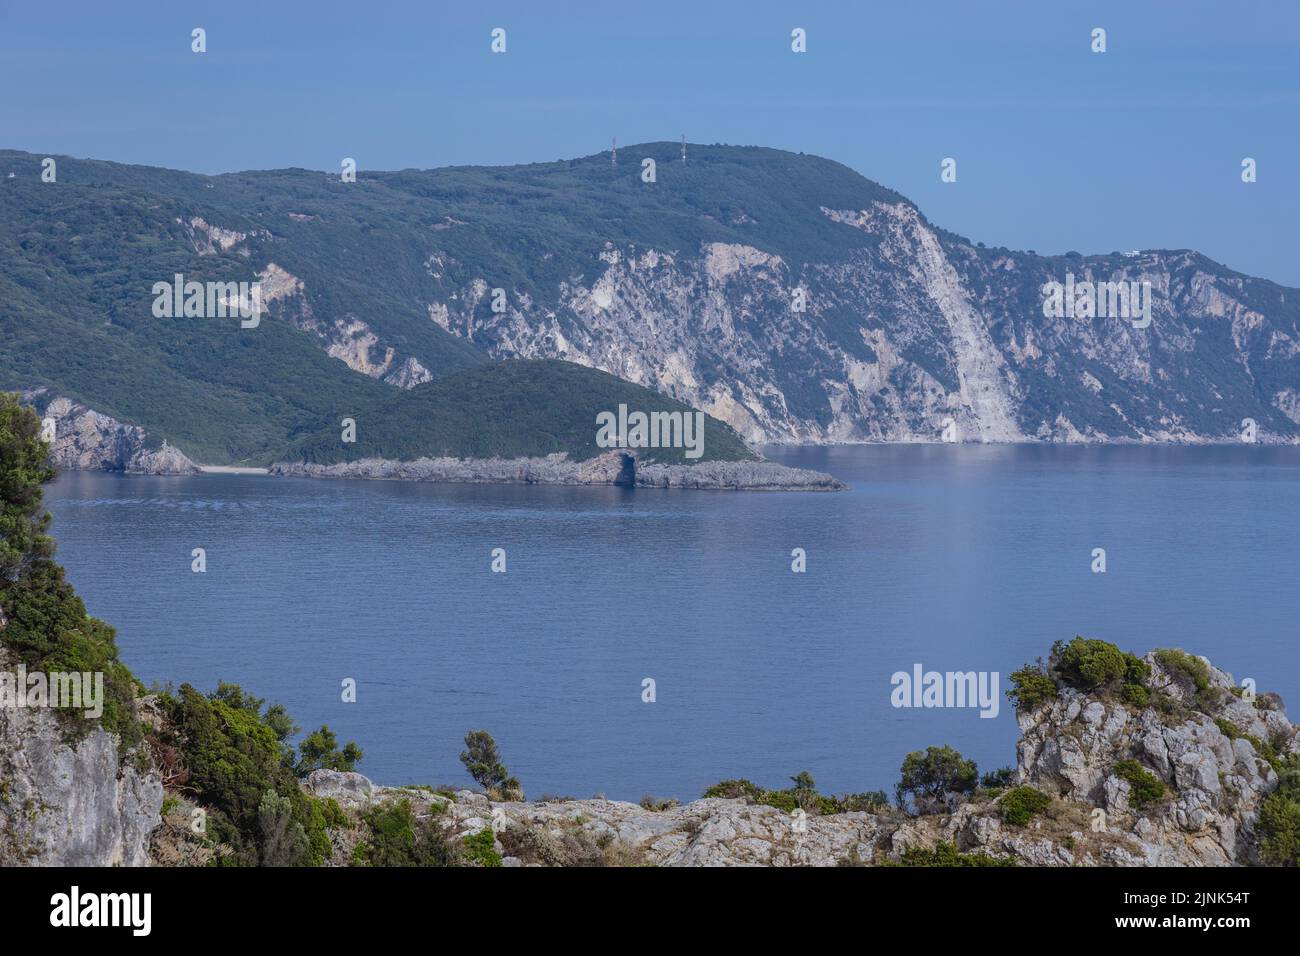 Aerial view from hilltop in Palaiokastritsa famous resort town on Greek Island of Corfu Stock Photo